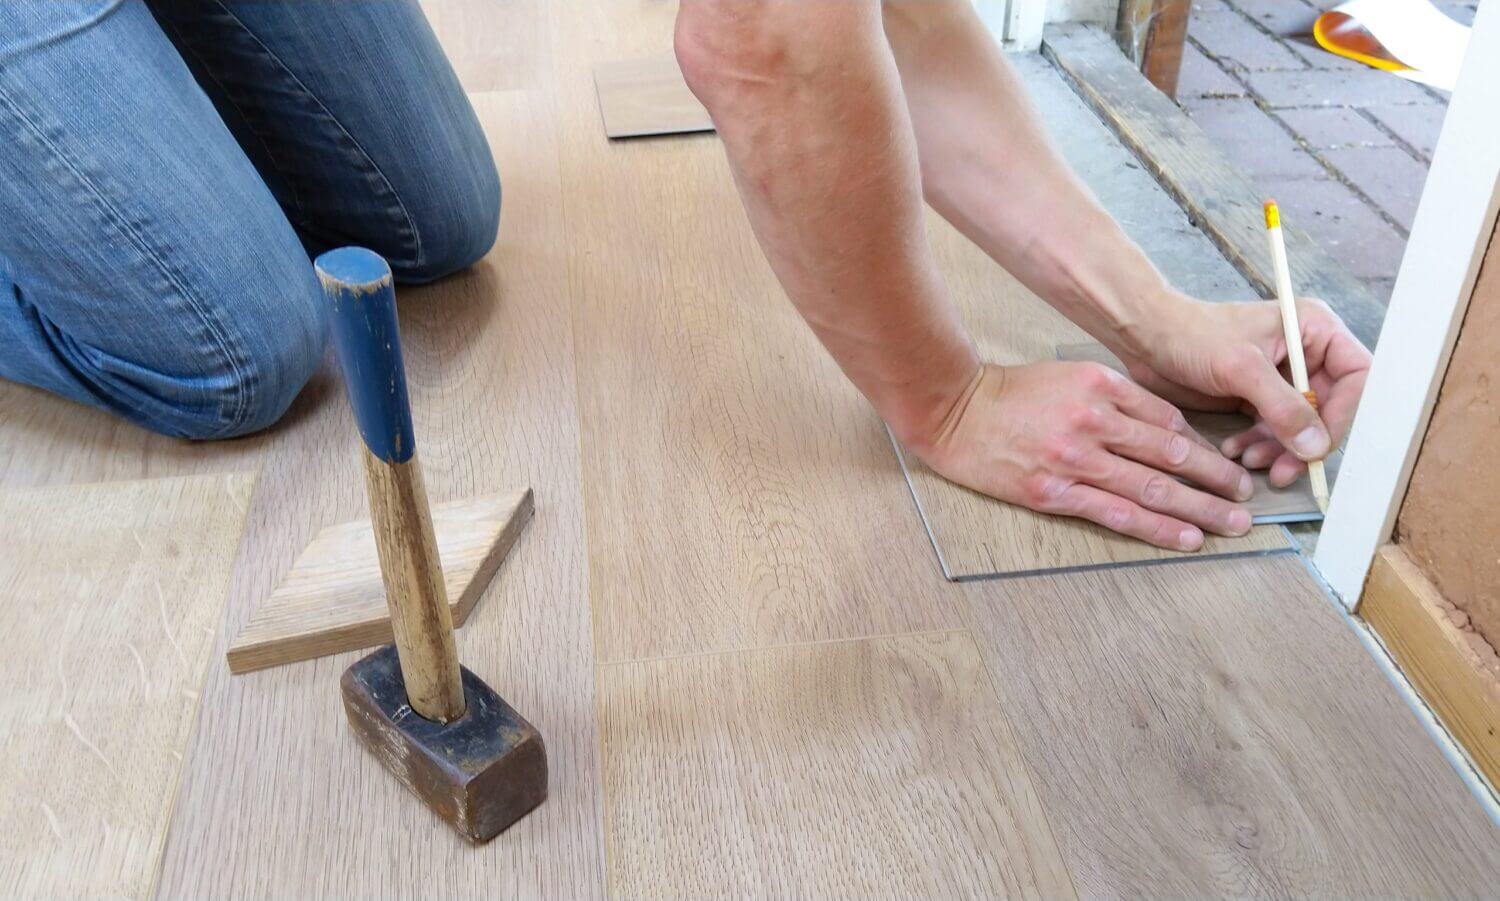 person installing flooring inside a home